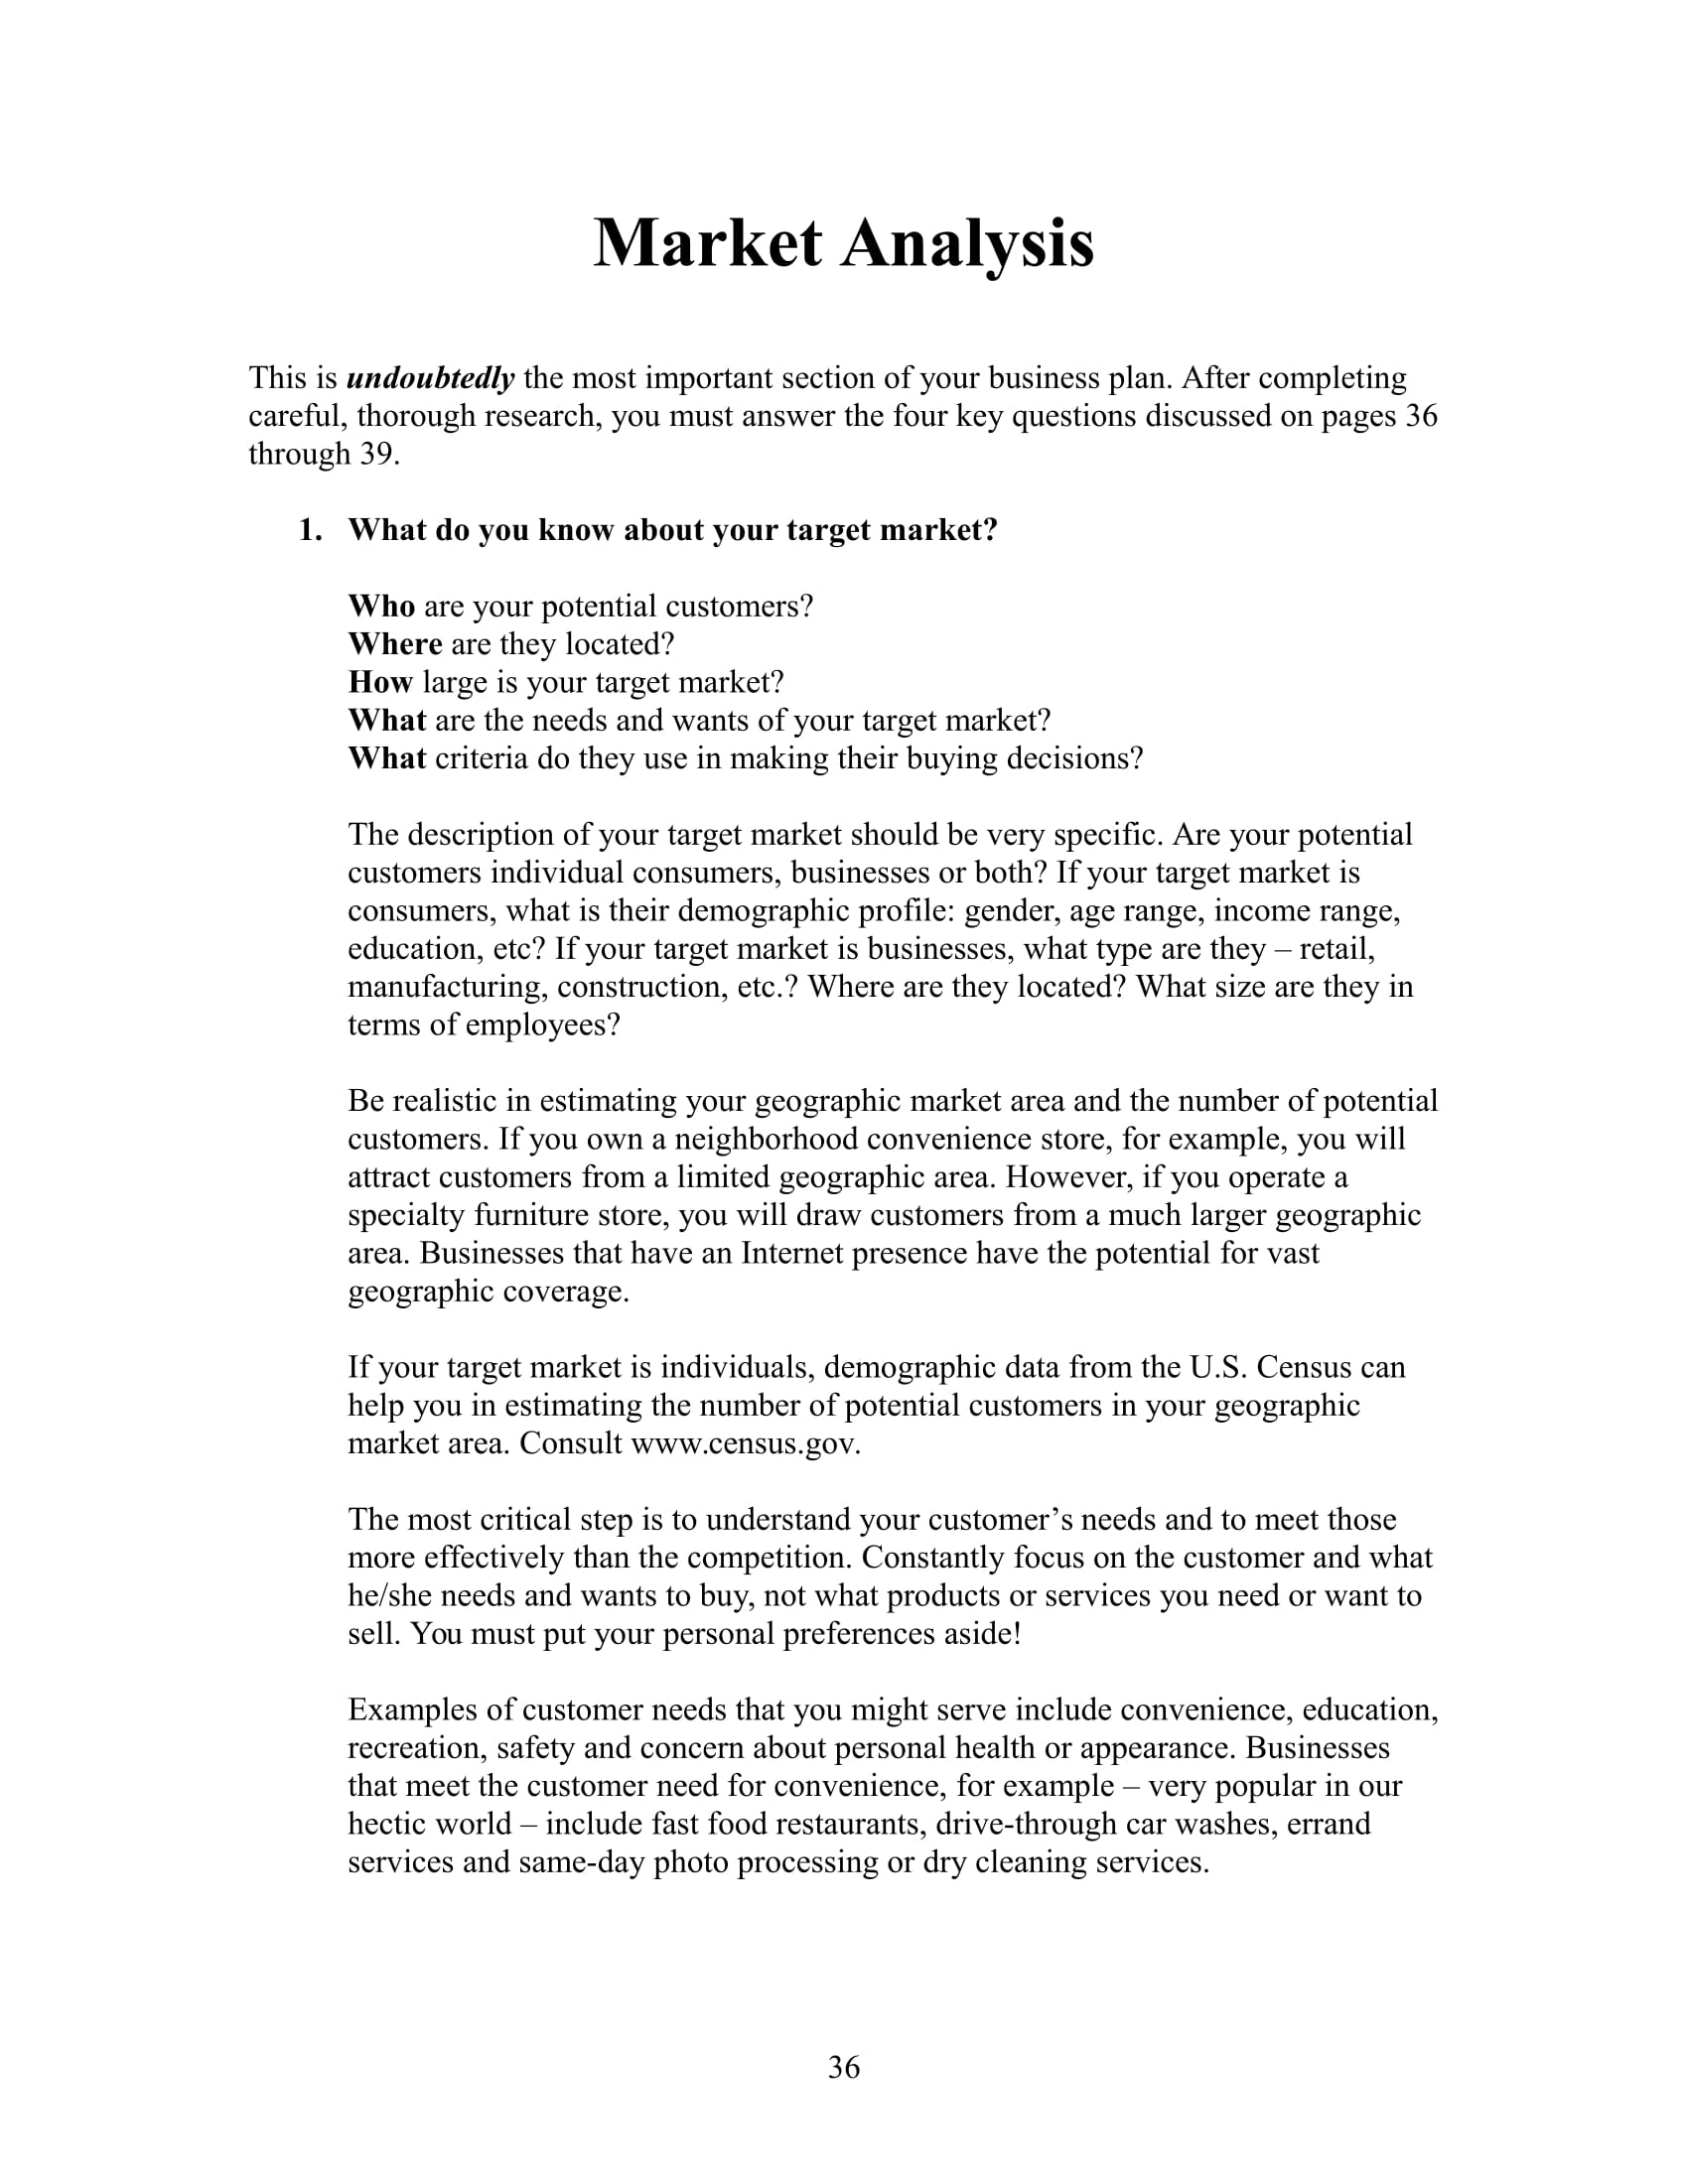 Marketing Research Papers - blogger.com